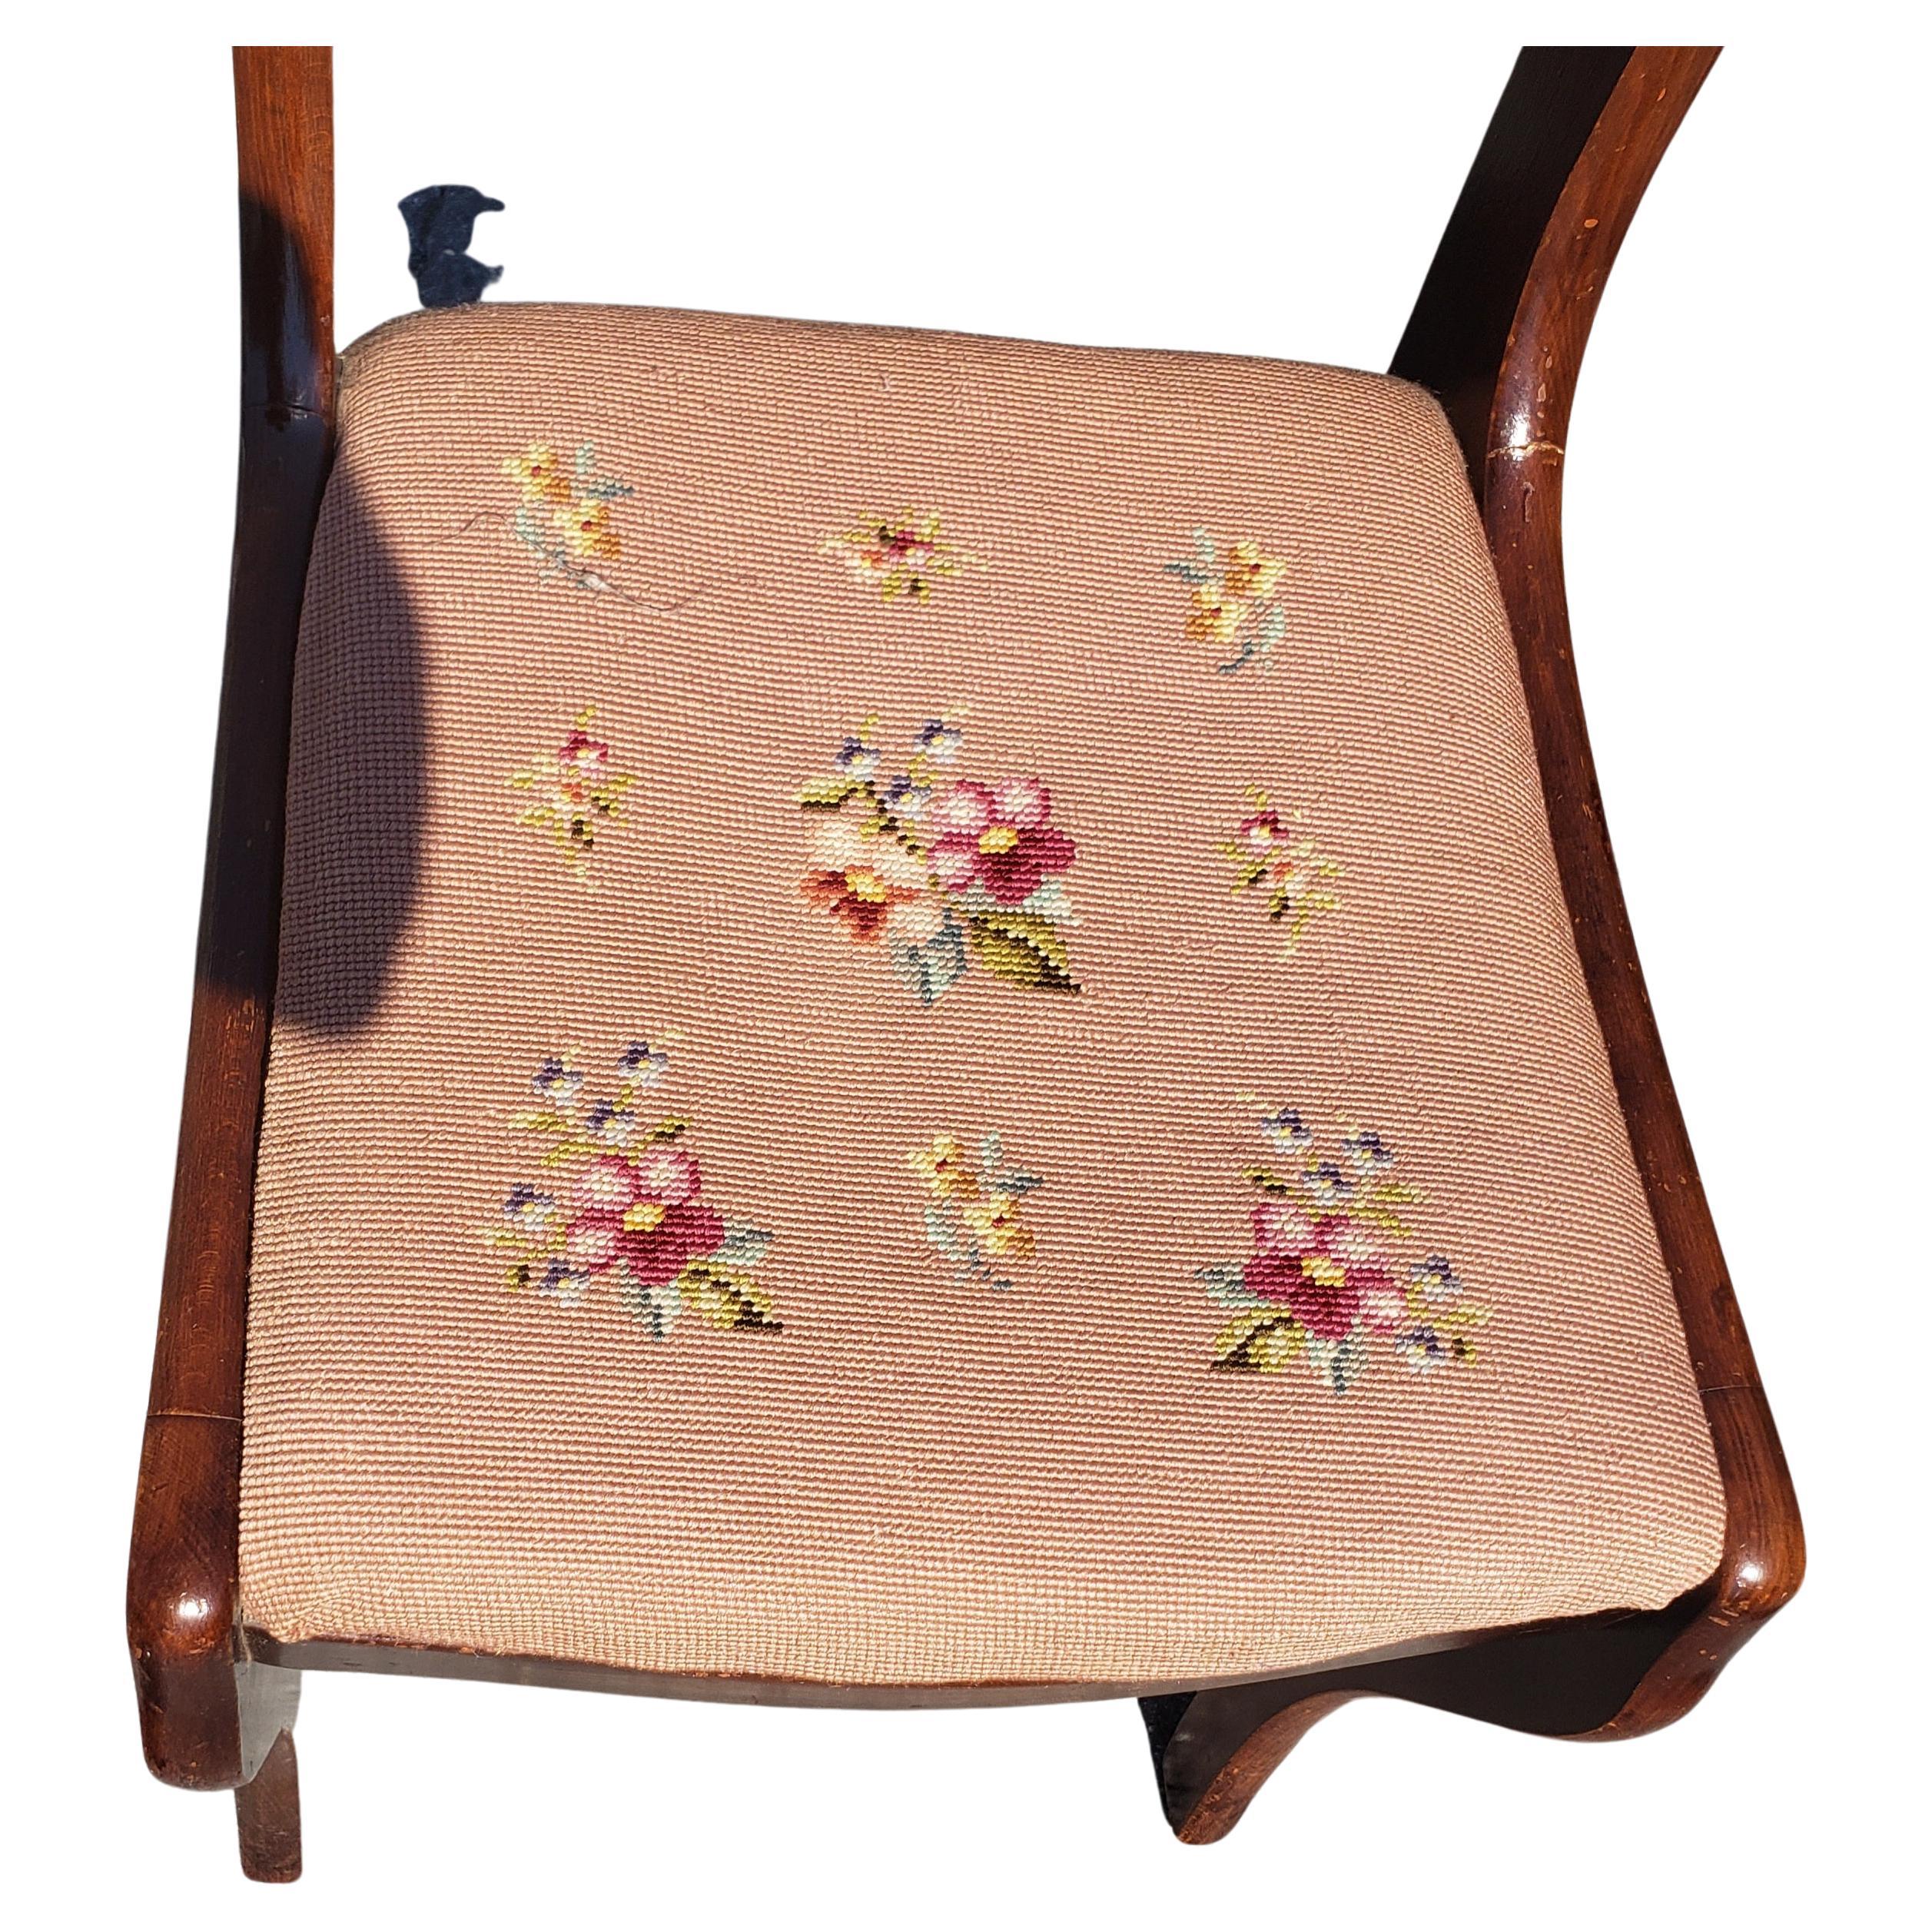 American 1940’s Tell City Mahogany Duncan Phyfe Rose Chair W/ Needlepoint Seat, Set of 4